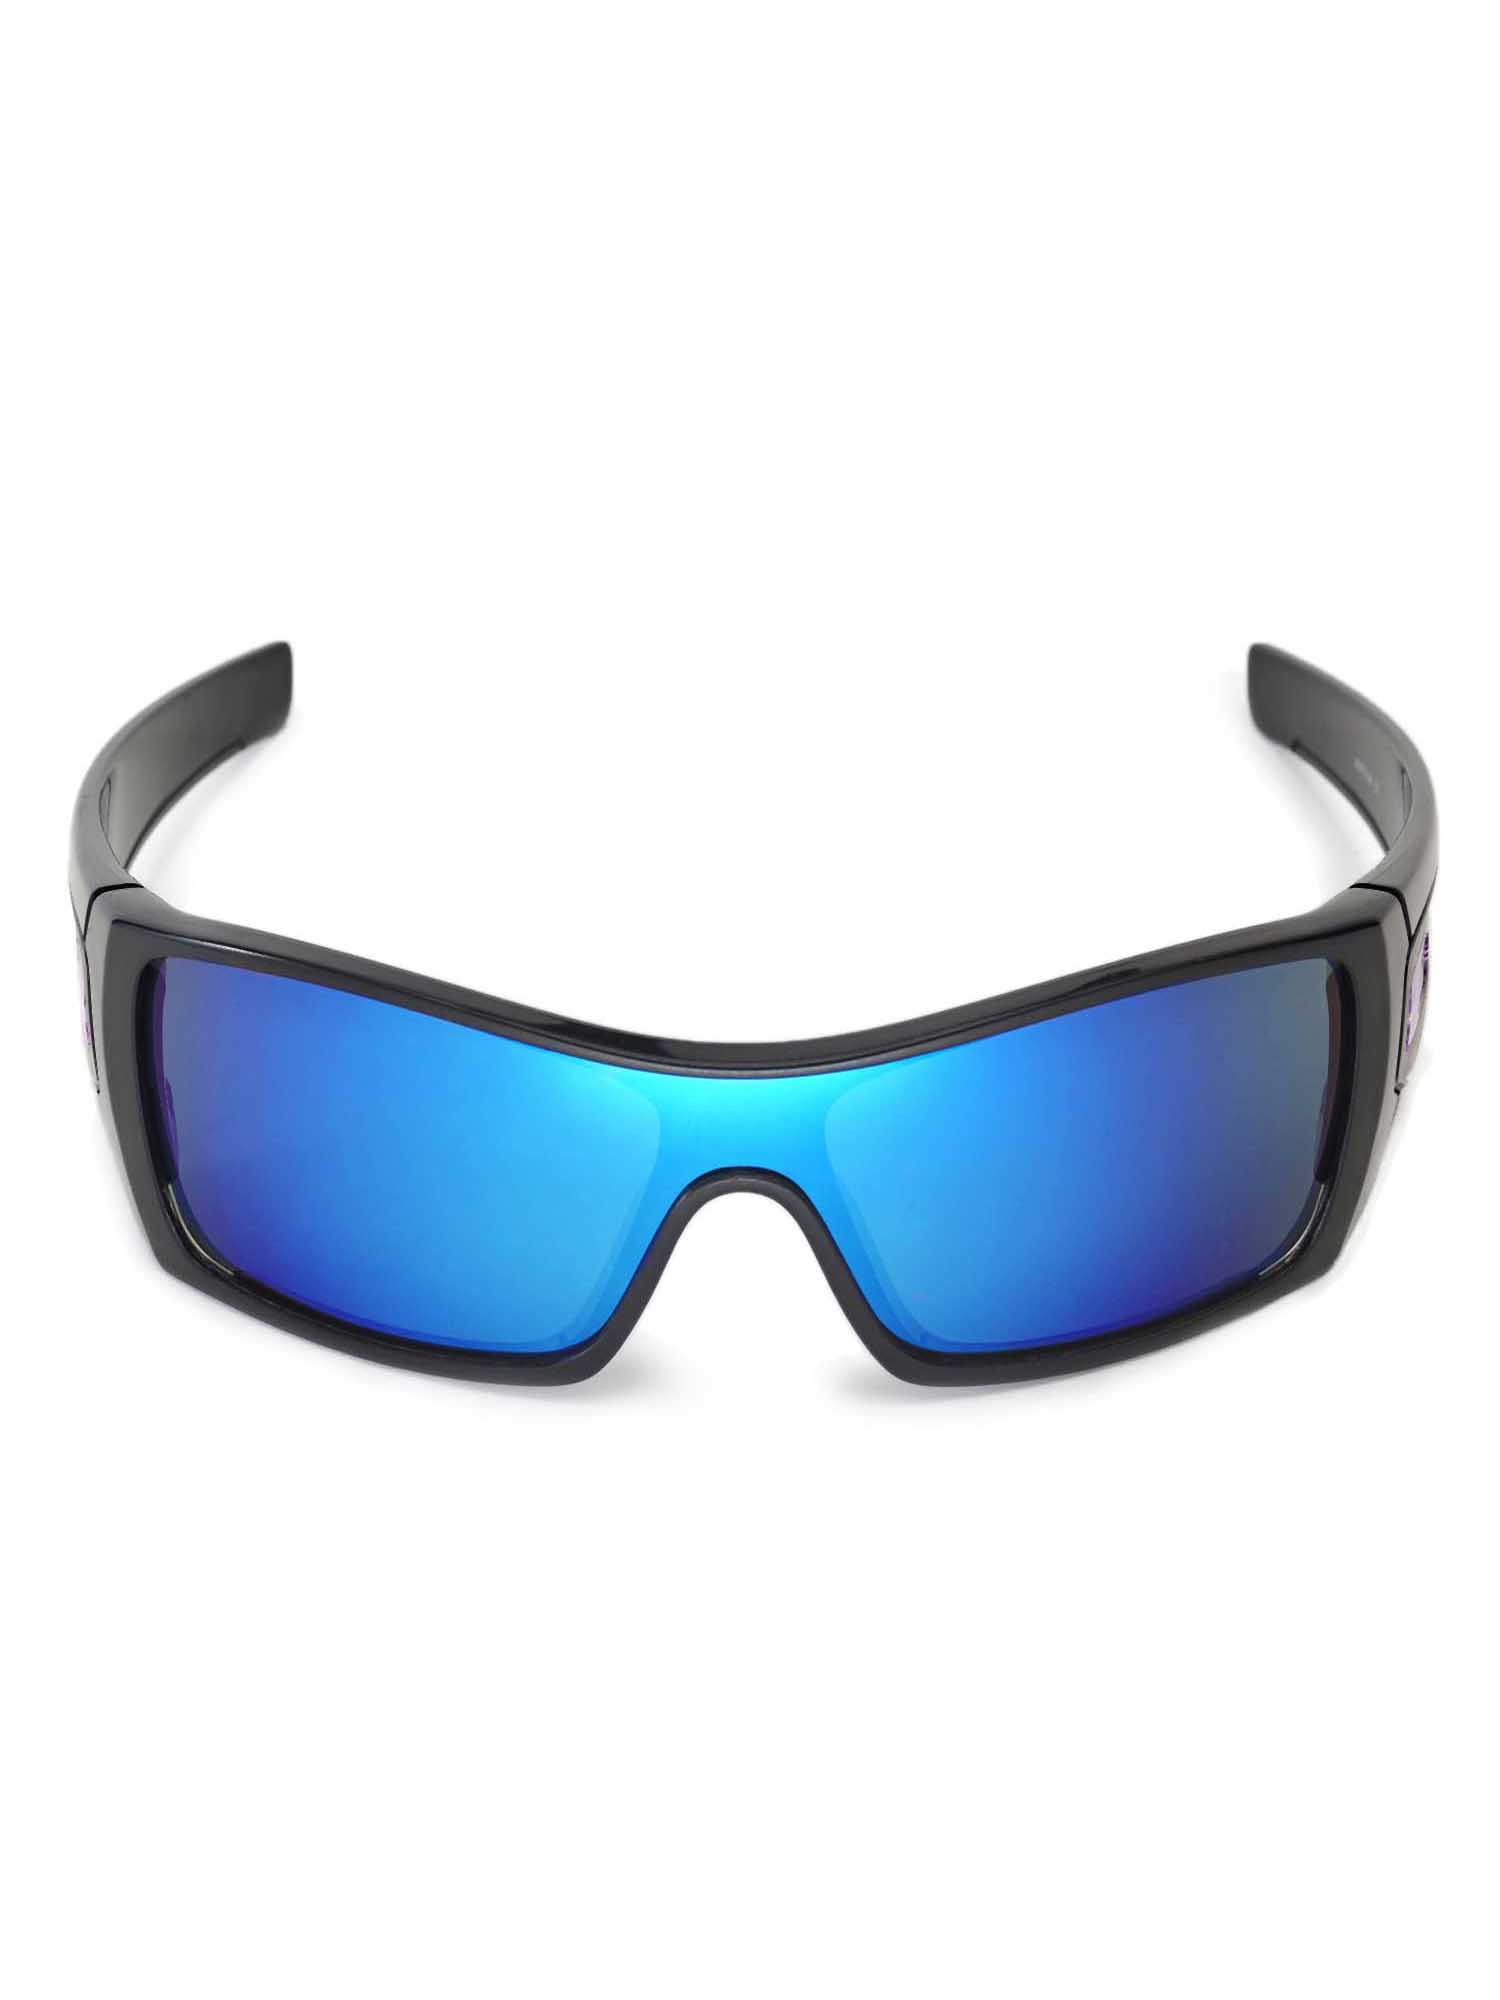 Walleva Ice Blue Polarized Replacement Lenses for Oakley Batwolf Sunglasses - image 6 of 7